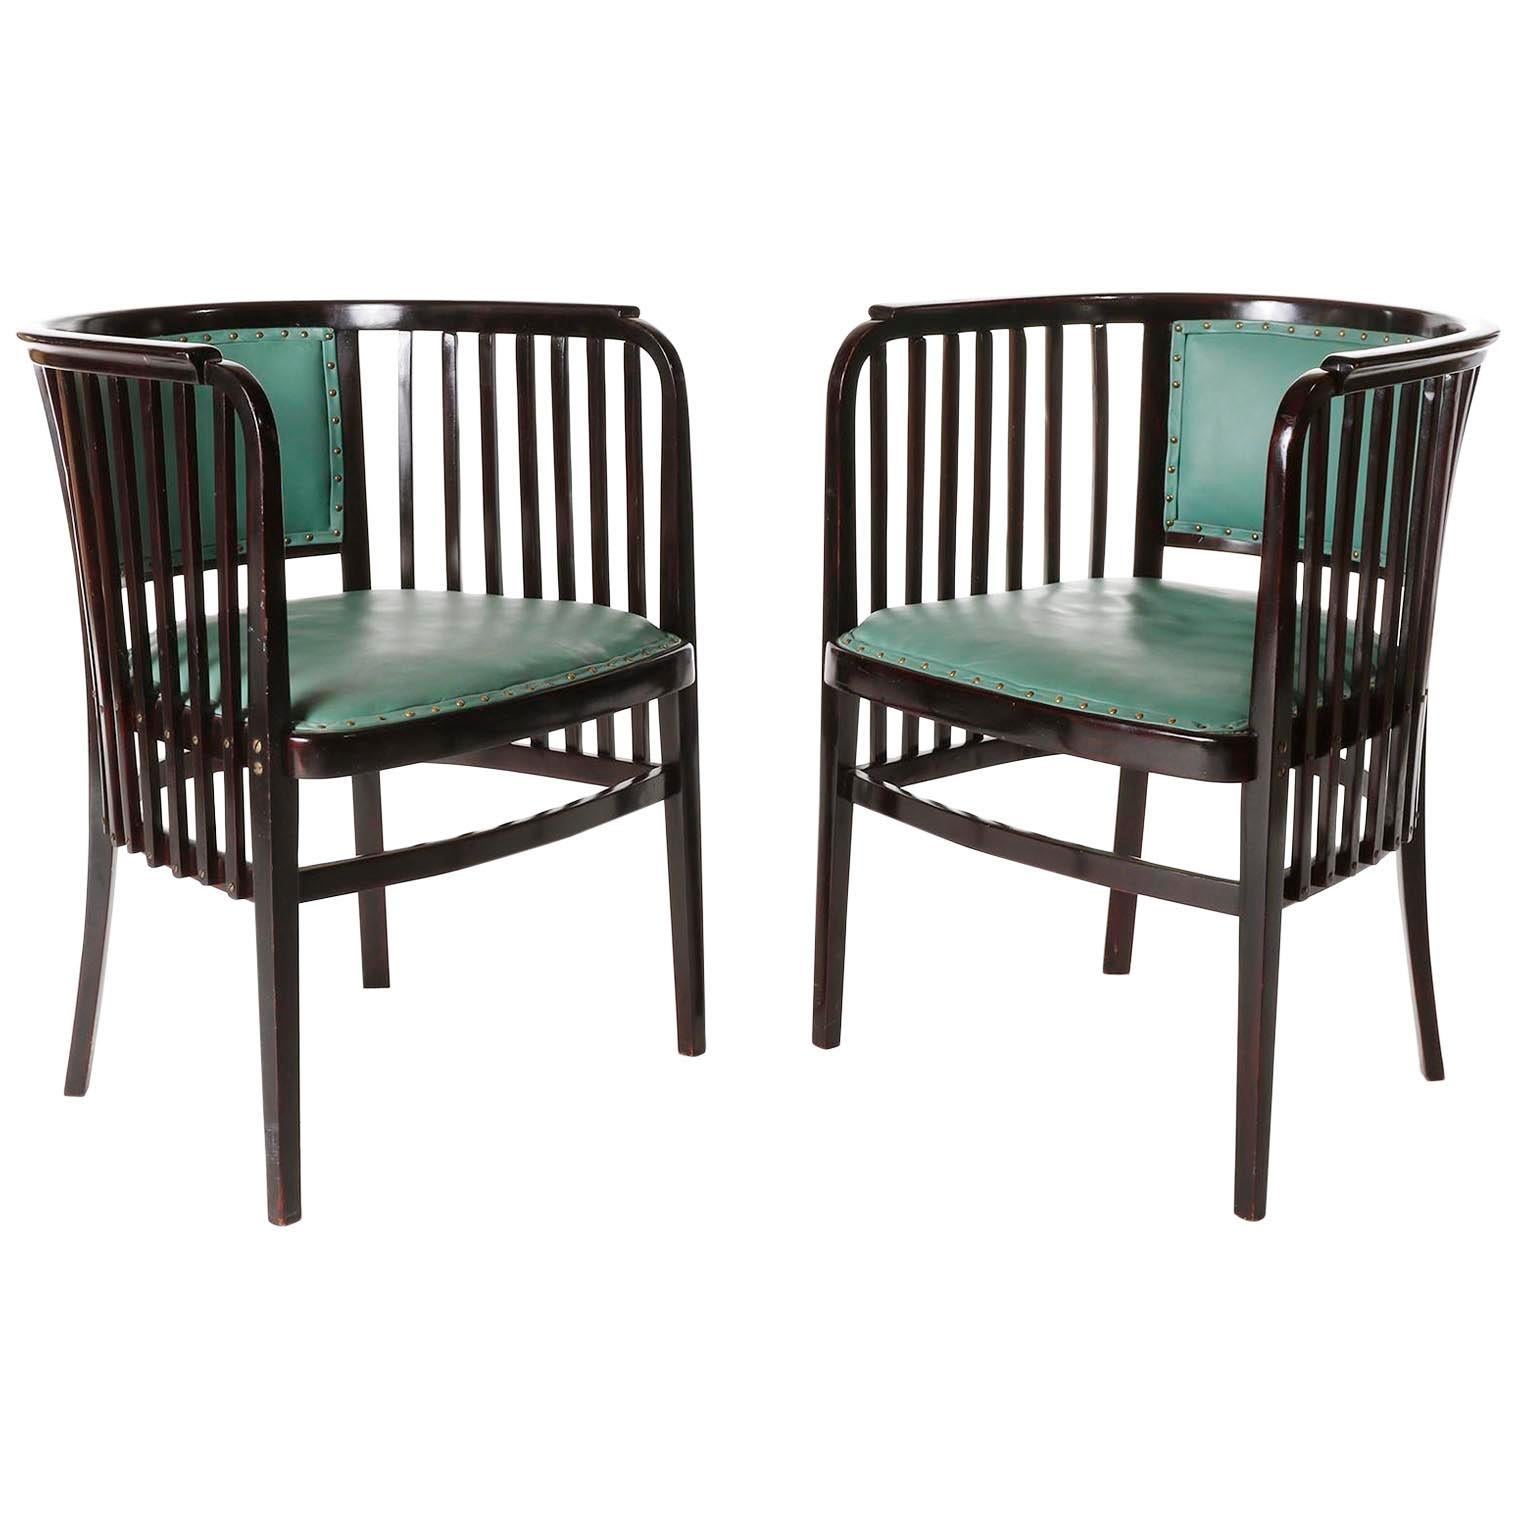 Pair of Armchairs Chairs Marcel Kammerer, Thonet, Turquoise Green Leather, 1910